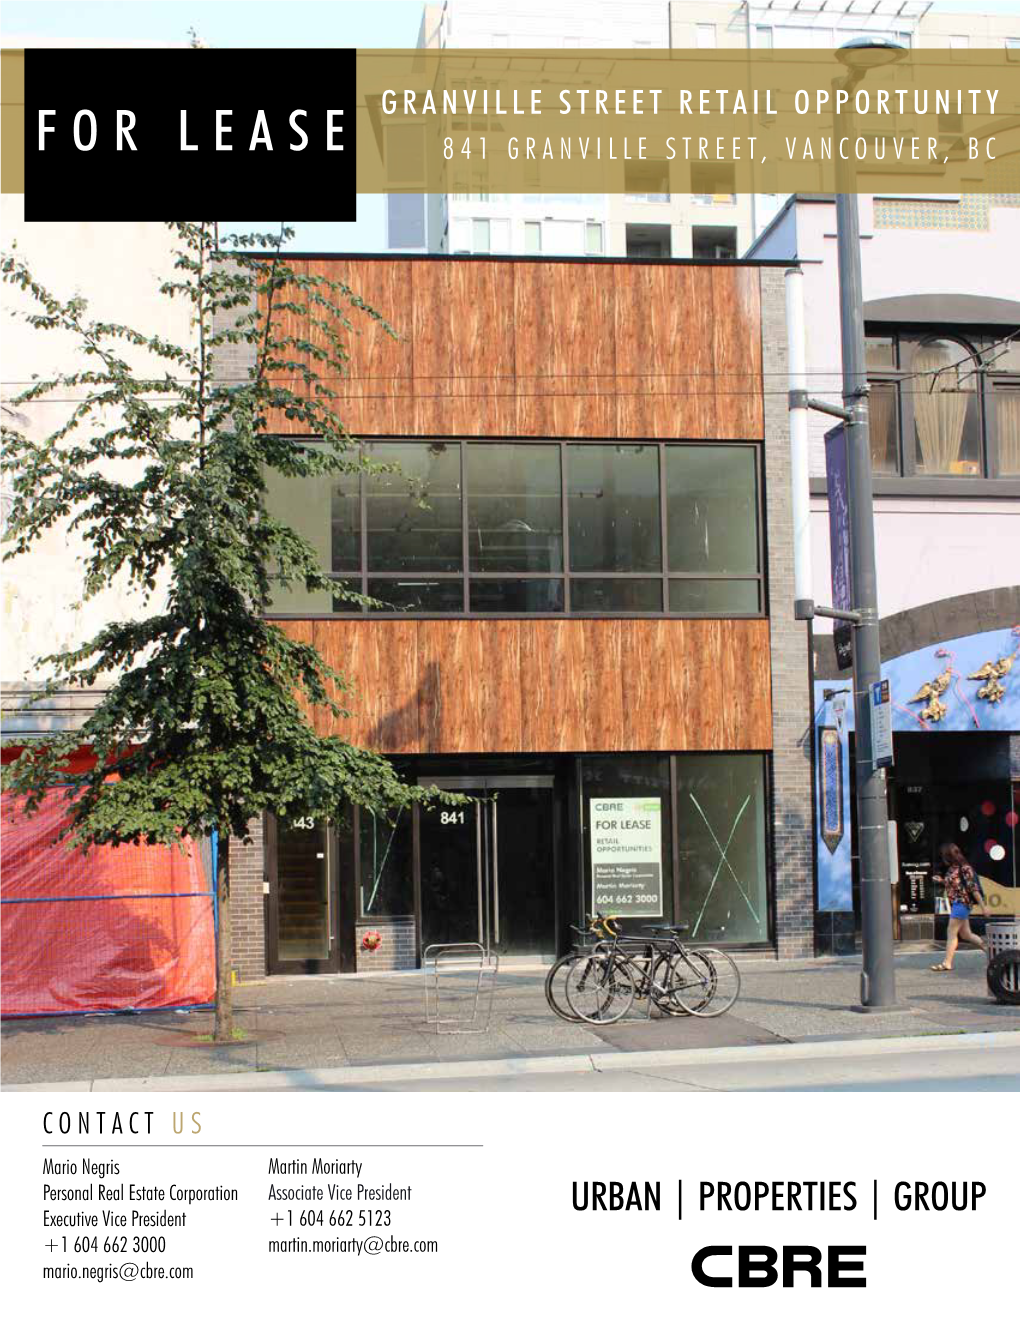 For Lease 841 Granville Street, Vancouver, Bc